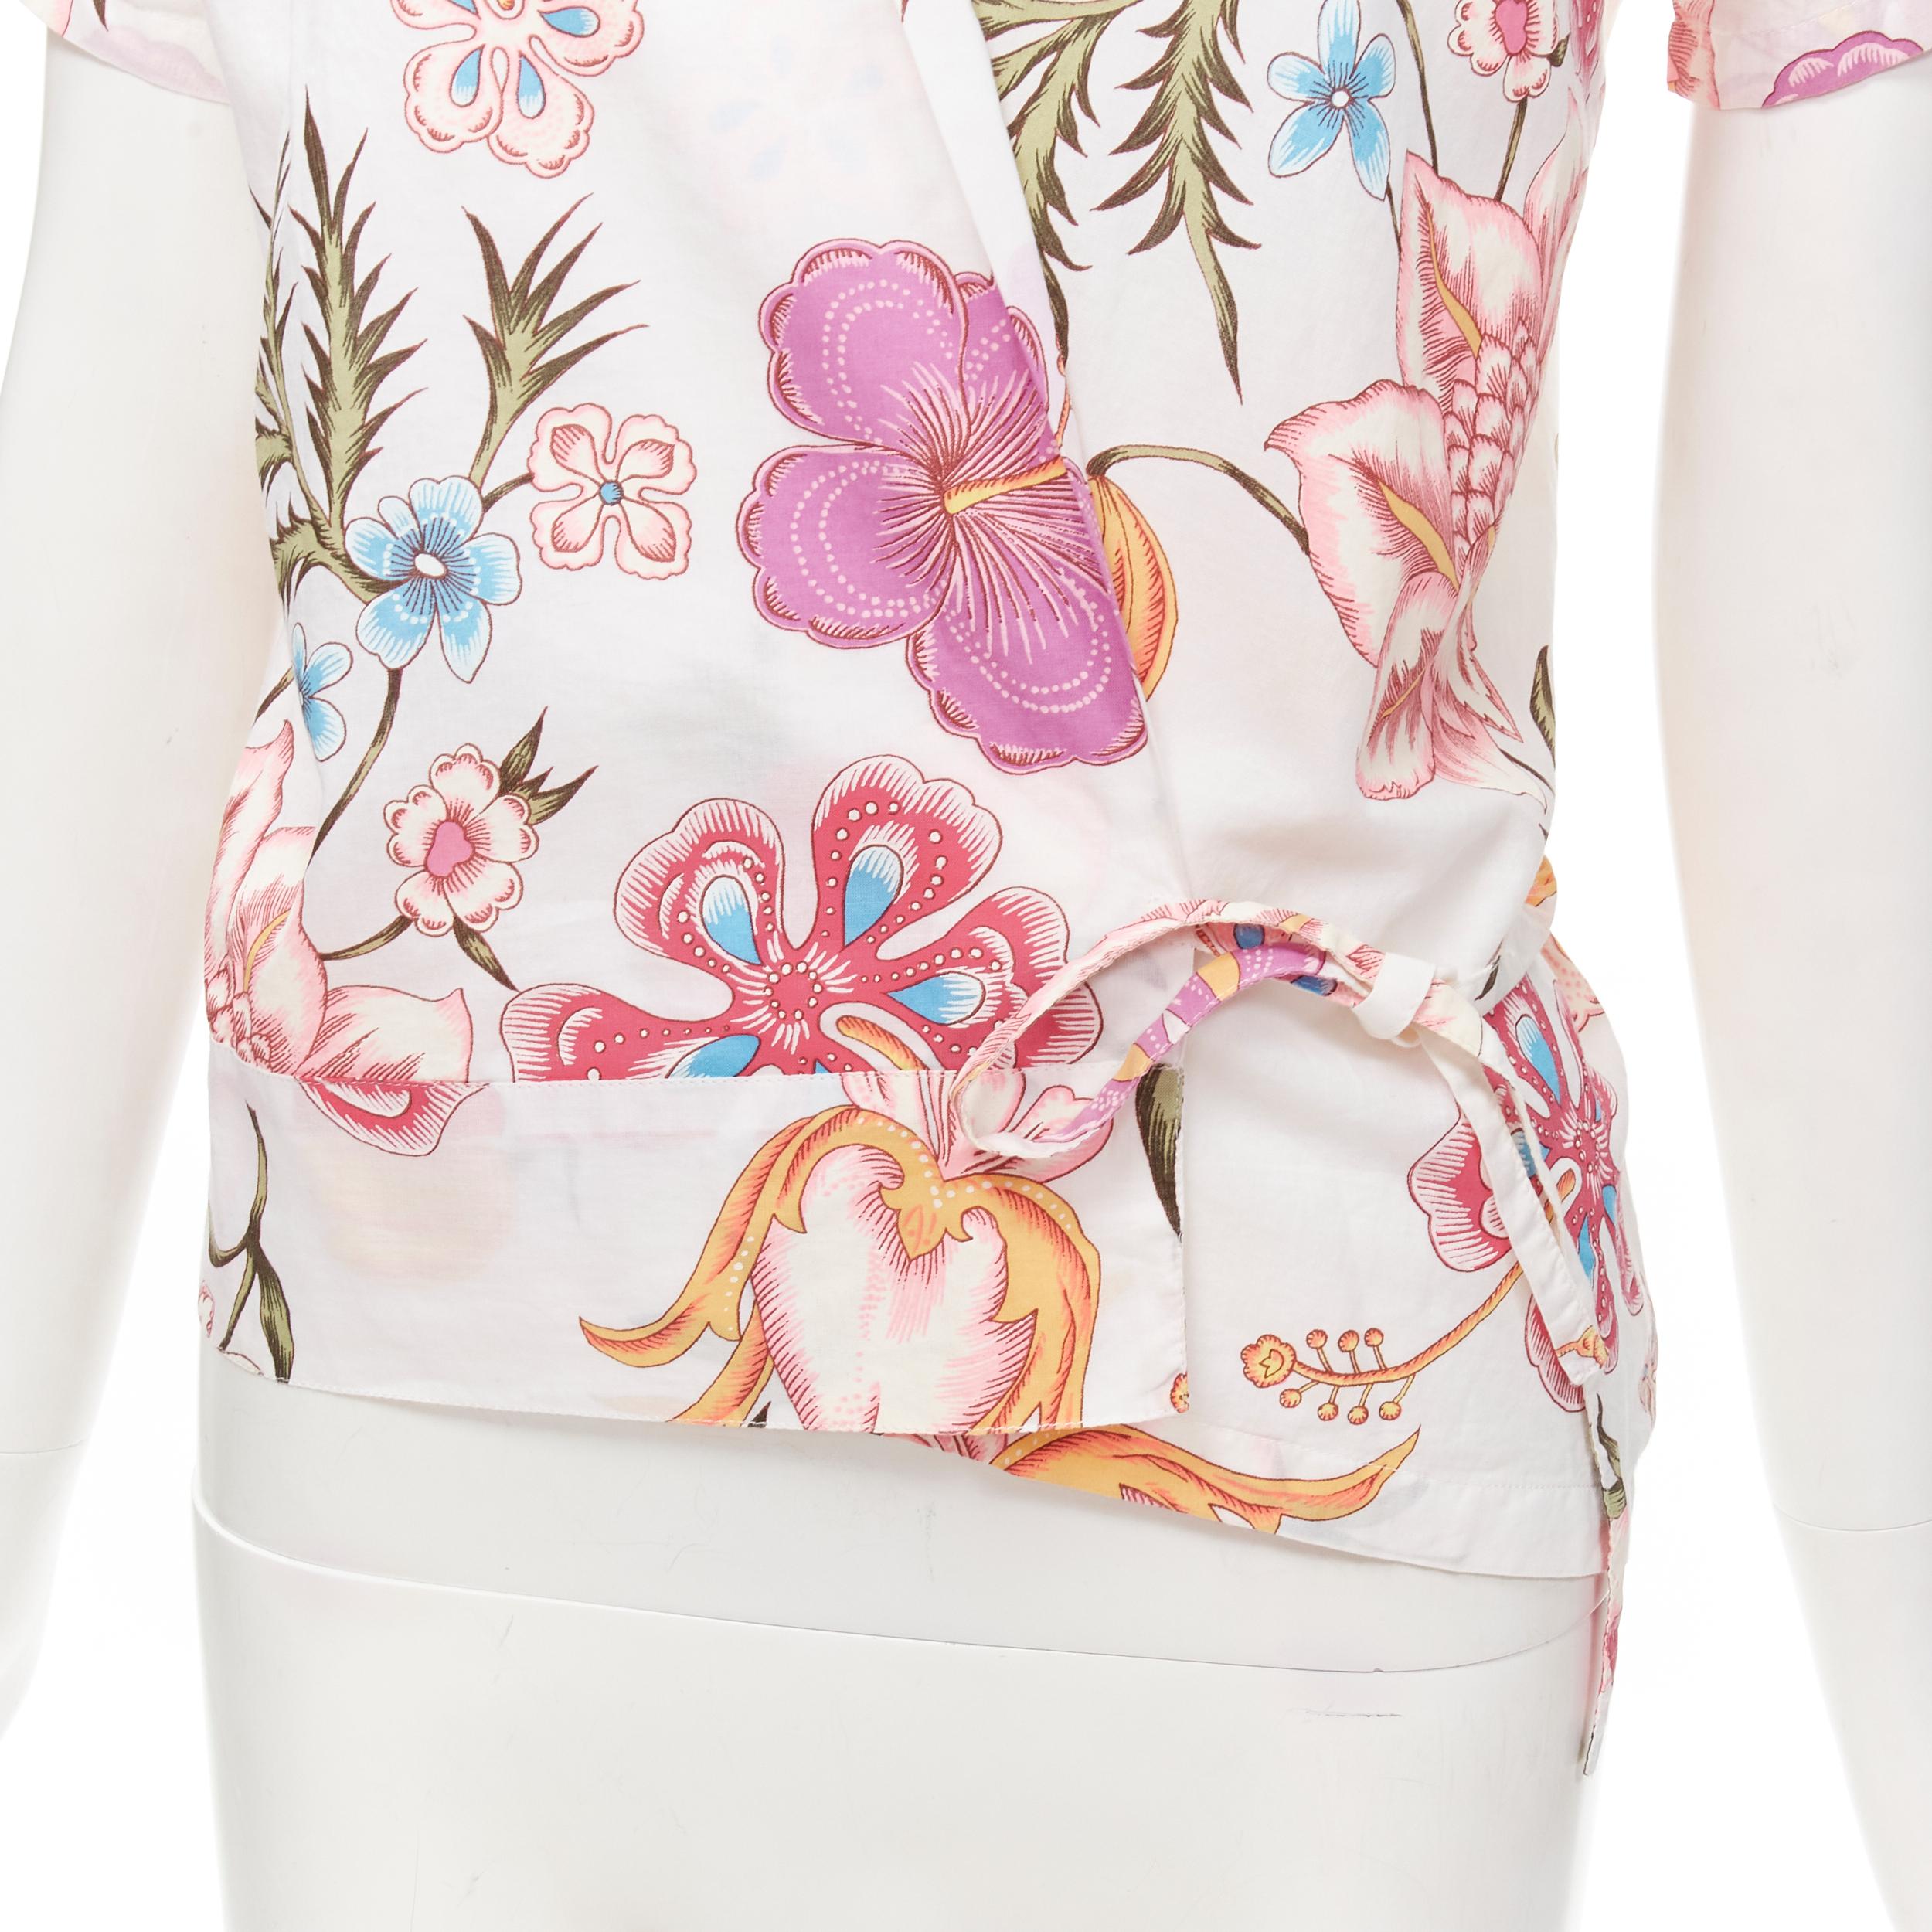 DRIS VAN NOTEN white pink floral print wrap kimono shirt FR38 M
Brand: Dries Van Noten
Material: Cotton
Color: White
Pattern: Floral
Closure: Self Tie
Extra Detail: Wrap kimono front.
Made in: Belgium

CONDITION:
Condition: Very good, this item was